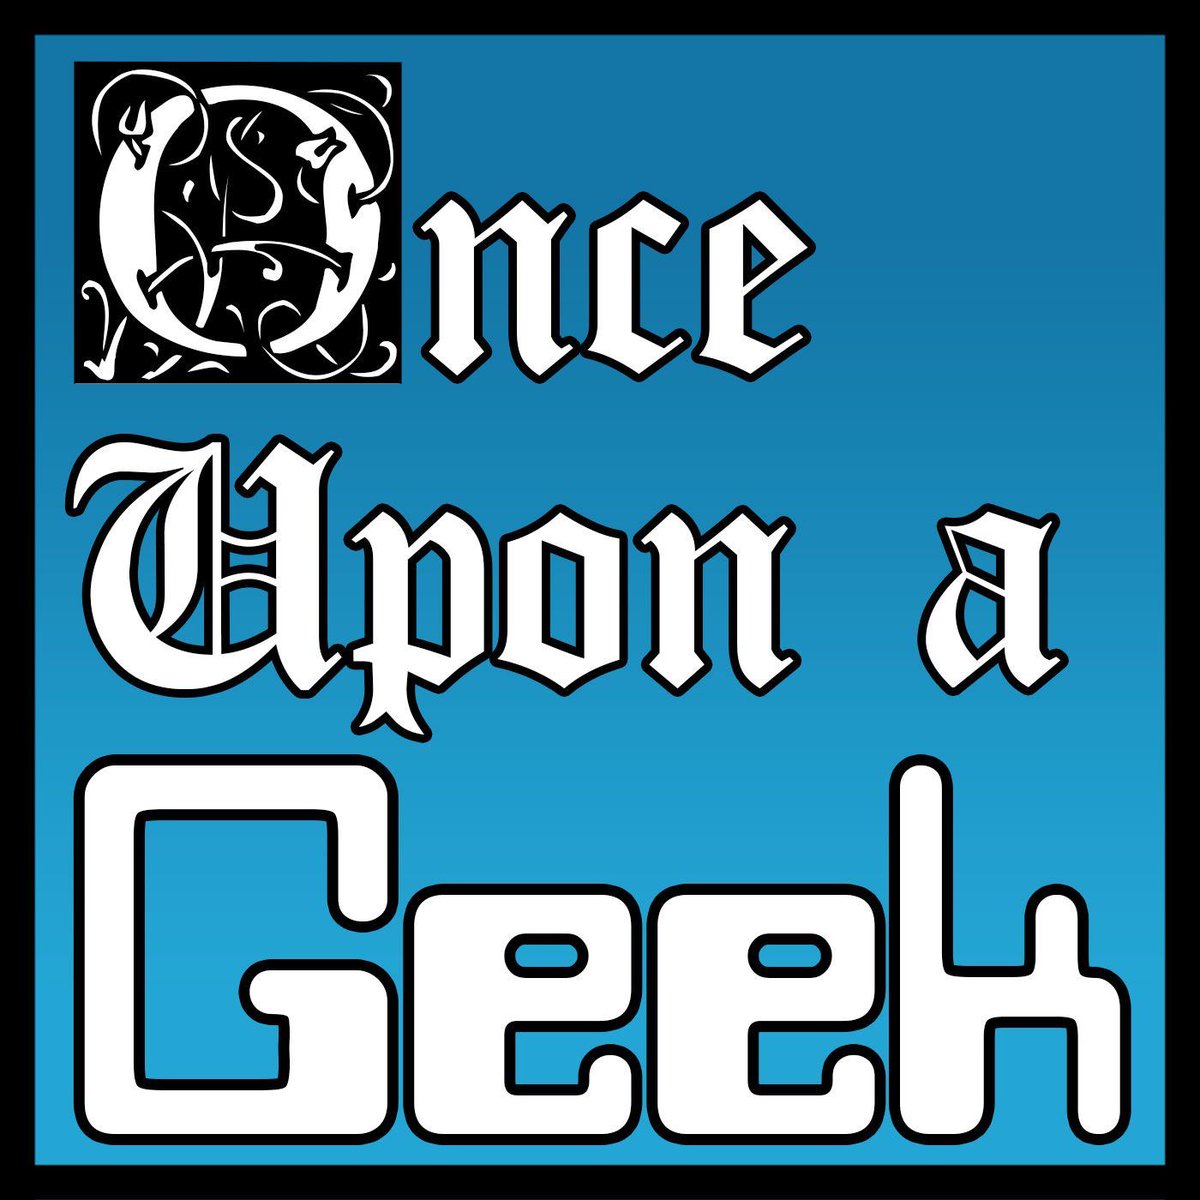 New ONCE UPON A GEEK PODCAST! We find our joy discussing Military Science Fiction novels, how we found the genre, why we love it, favorite classics, lesser known books, and @VanAllenPlexico teases his upcoming military #scifi book, ALPHA/OMEGA! fireandwaterpodcast.com/podcast/ouag21/